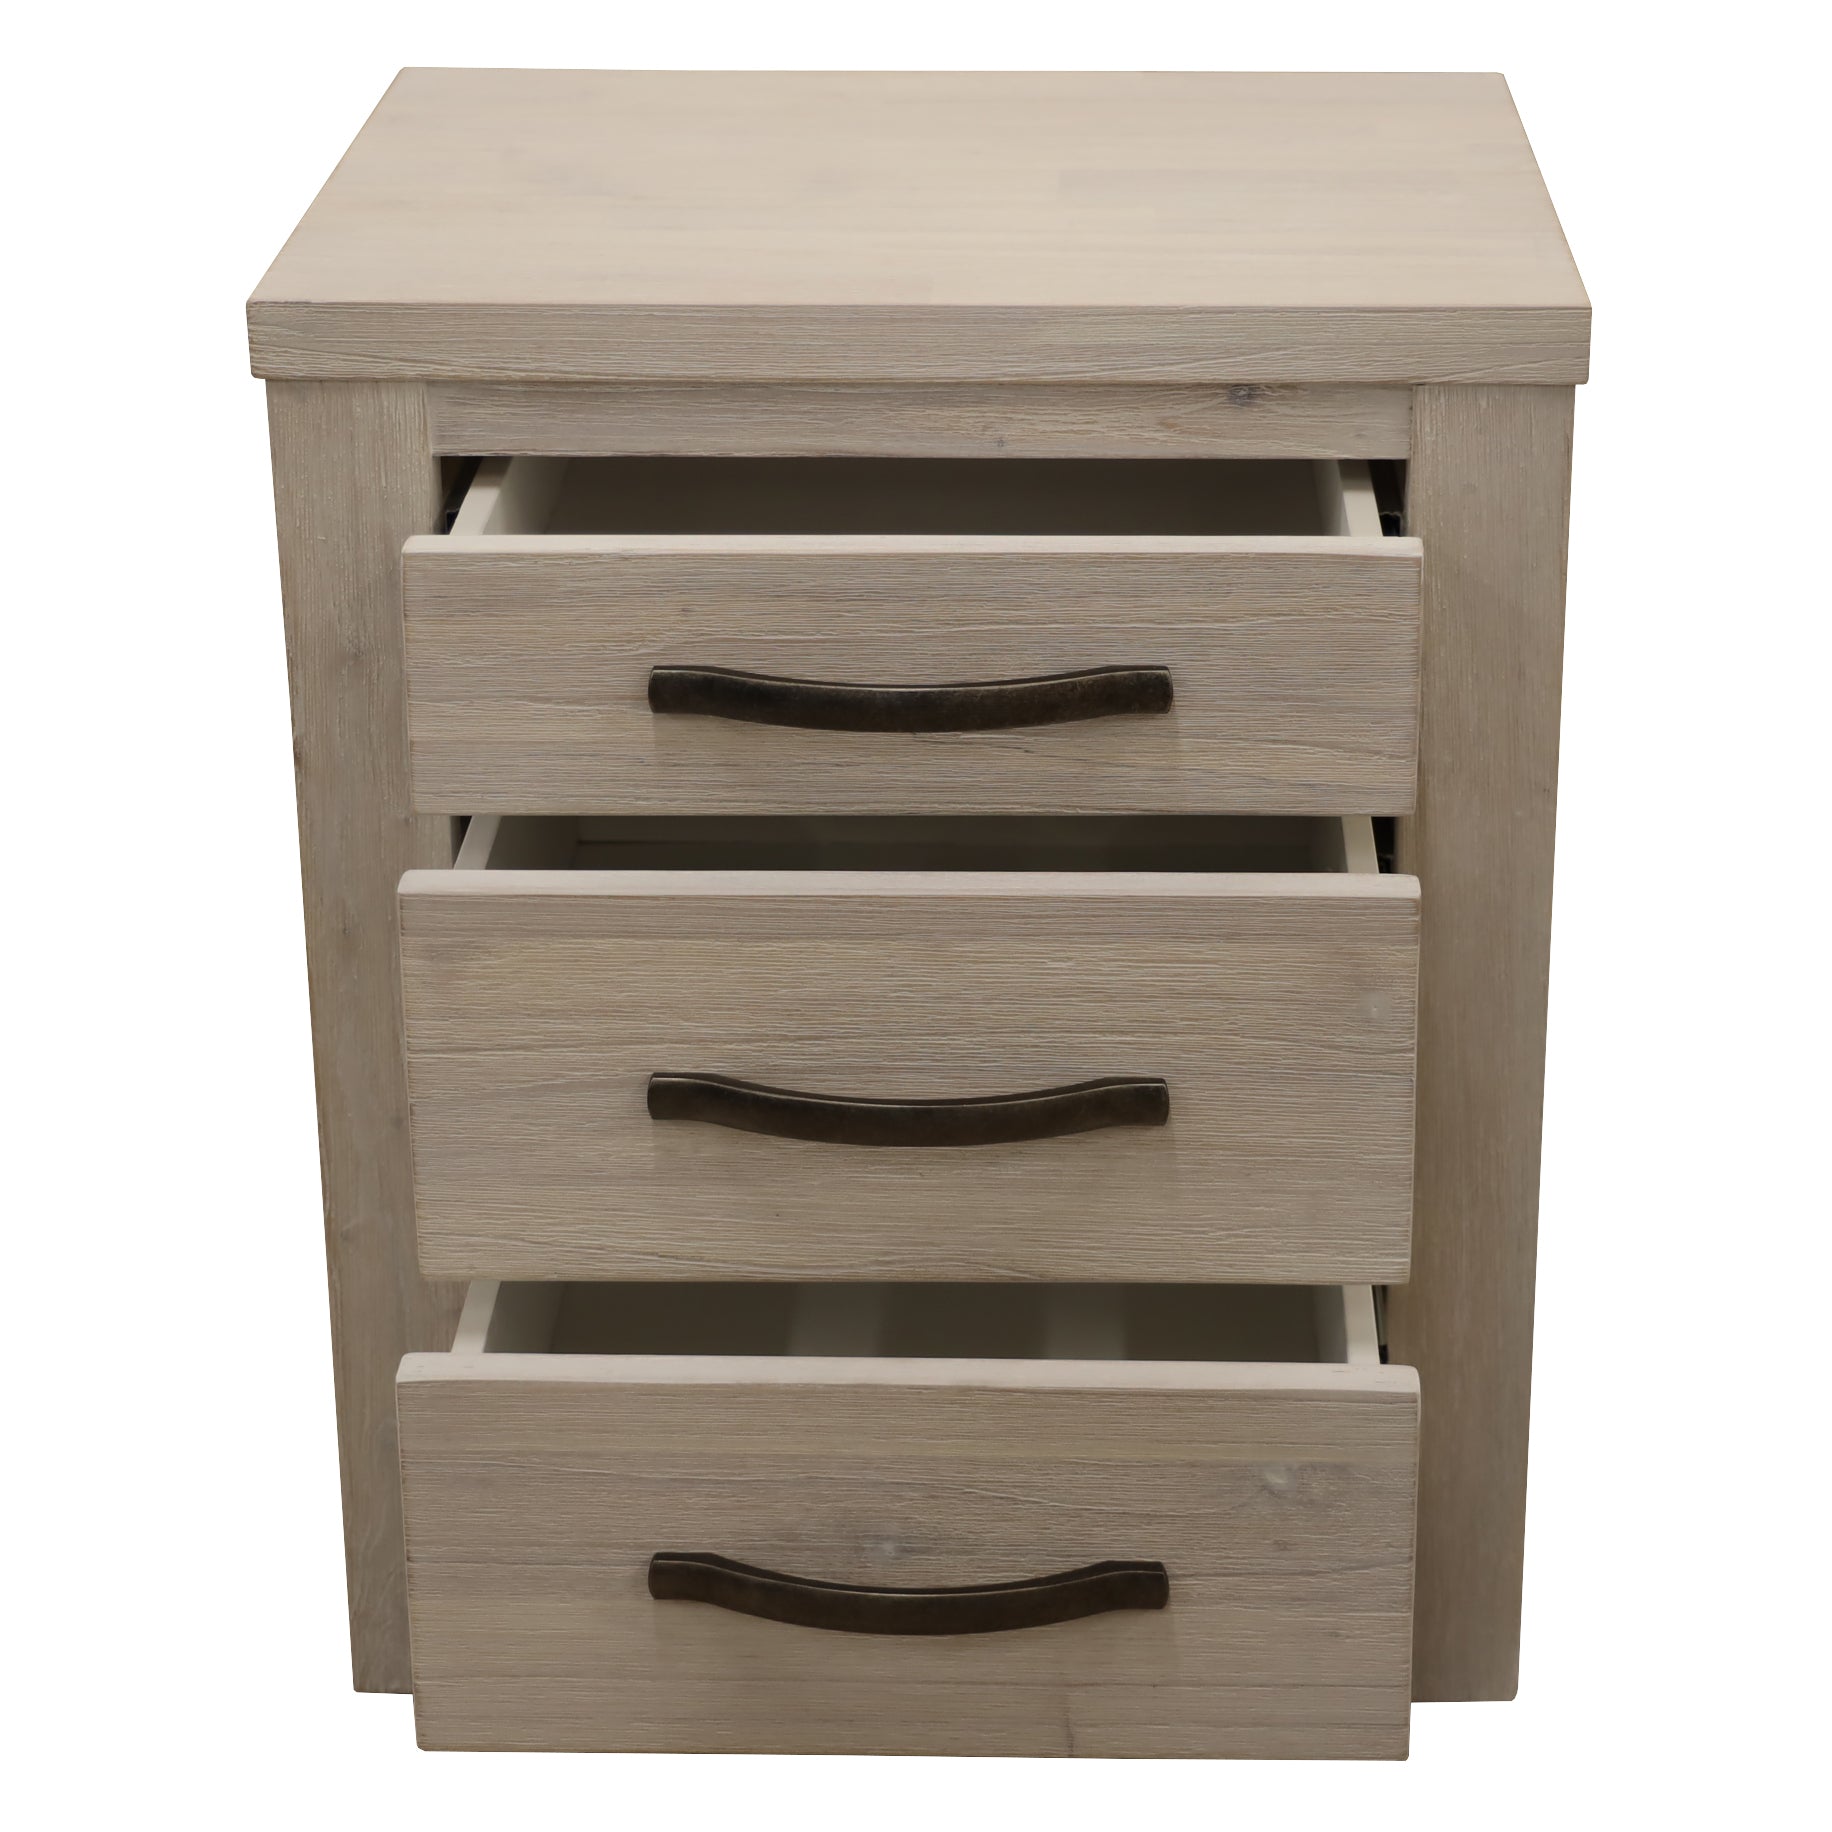 Foxglove Bedside Tables 3 Drawers Storage Cabinet Shelf Side End Table - White - SILBERSHELL